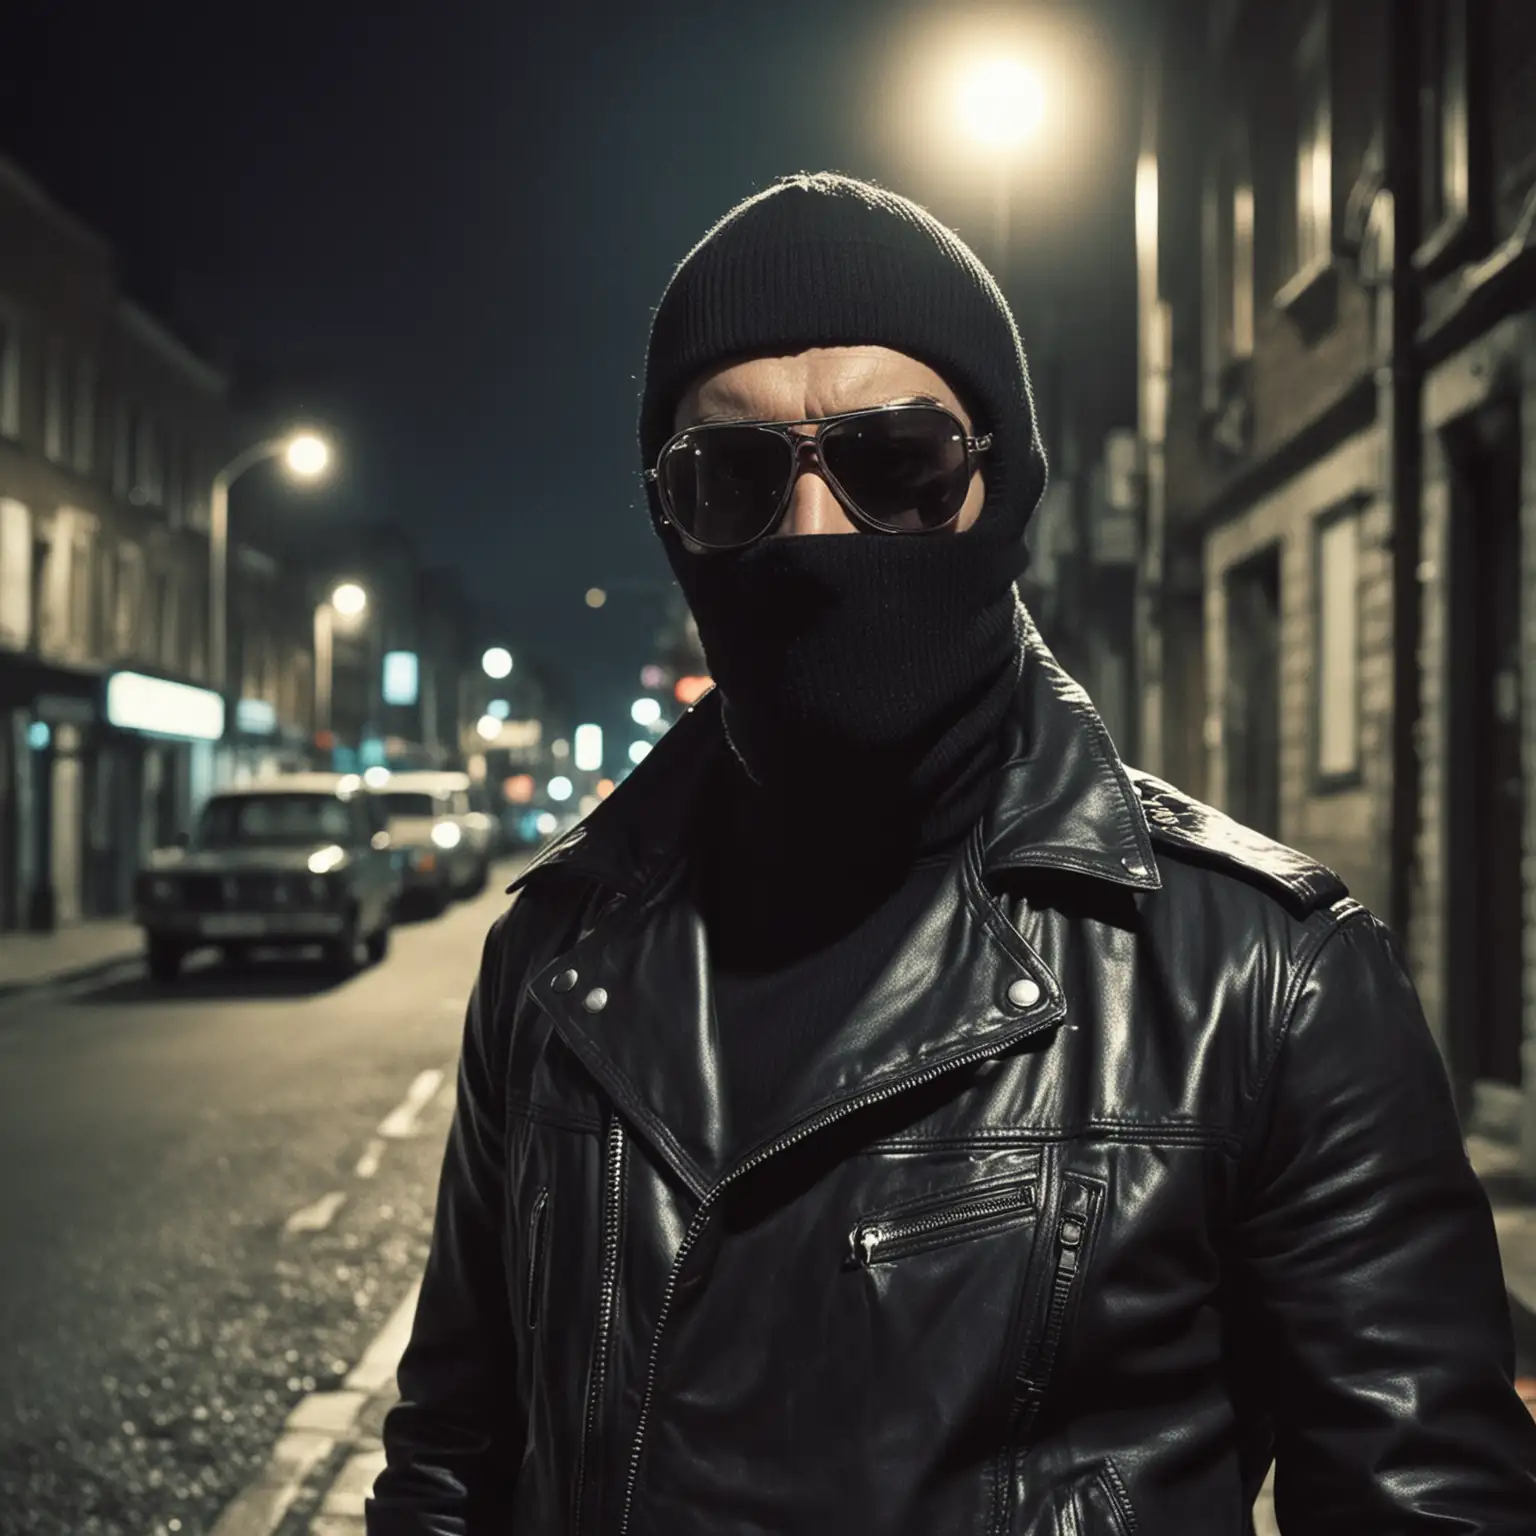 Undercover Detective in Balaclava and Leather Jacket on Dark Urban Streets